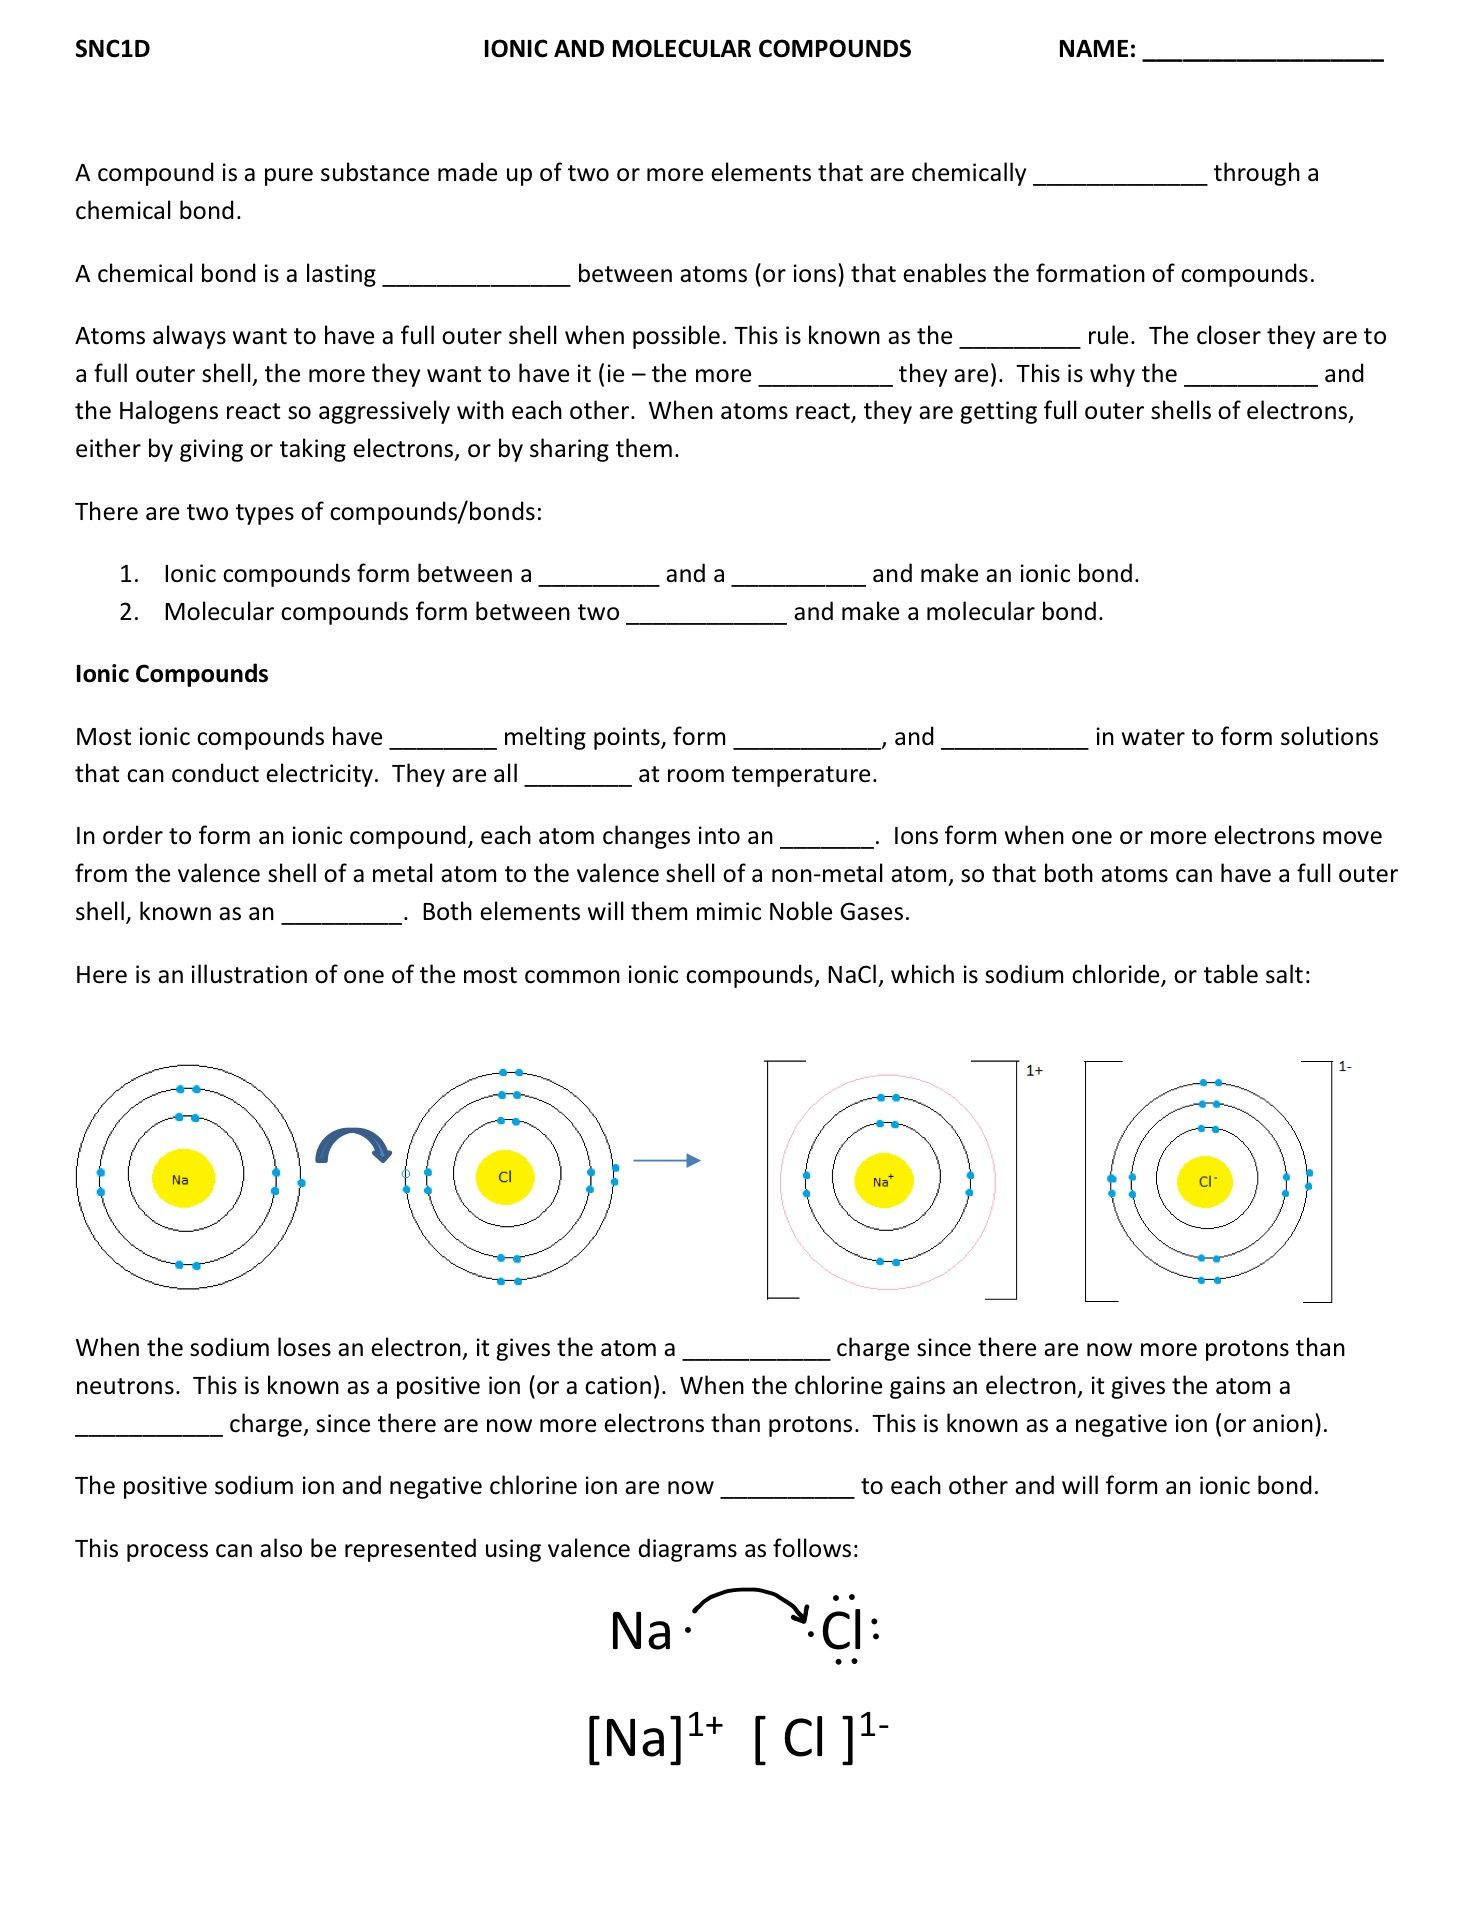 Molecules and Compounds Worksheet Molecular and Ionic Pounds Note &amp; Worksheet Wednesday